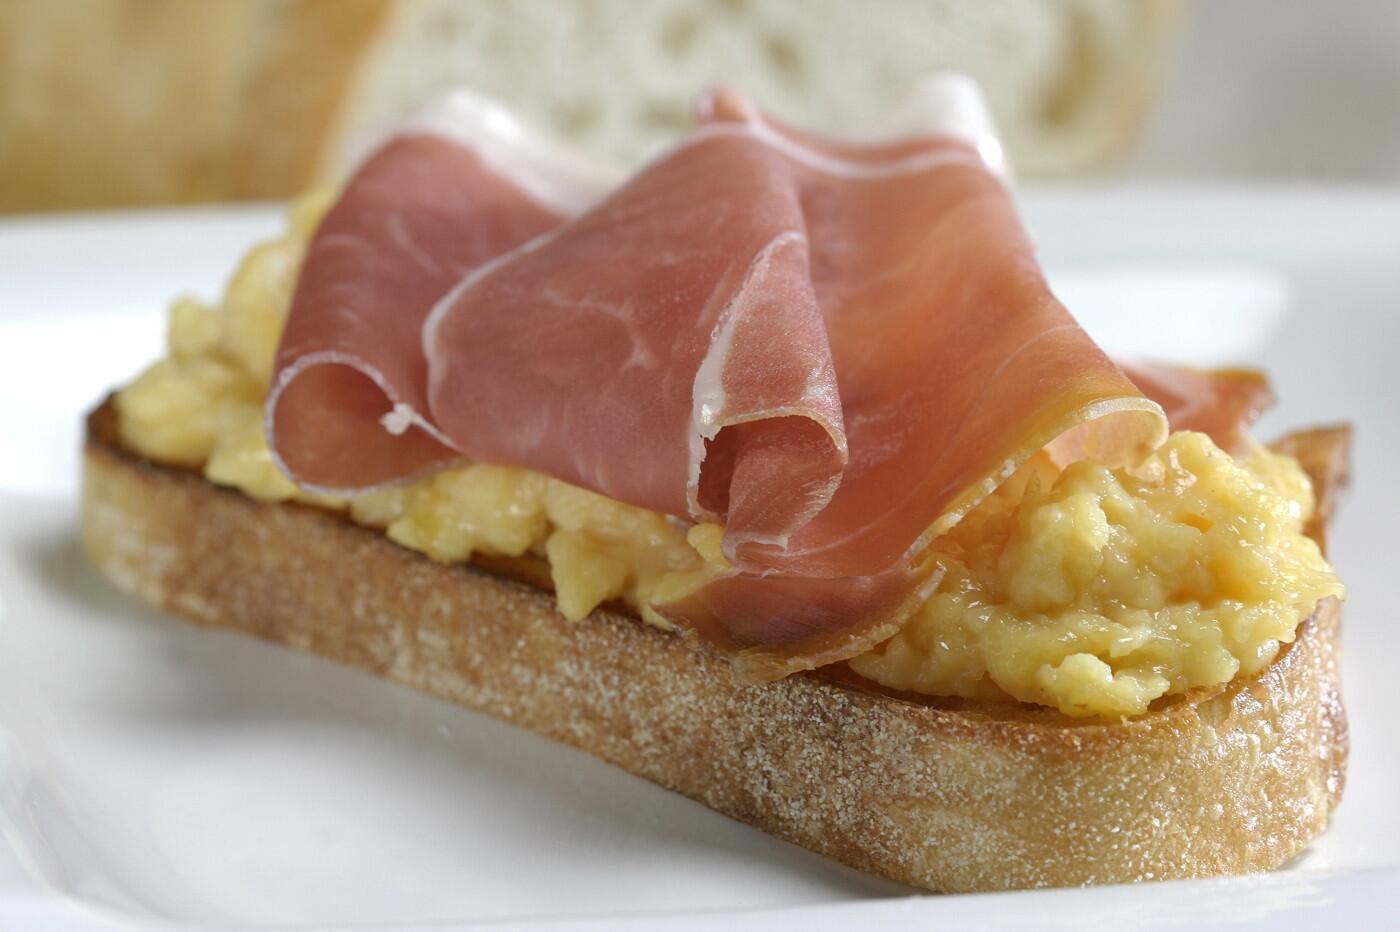 No need to rush when making these slow-scrambled eggs with prosciutto. Click here for the recipe.